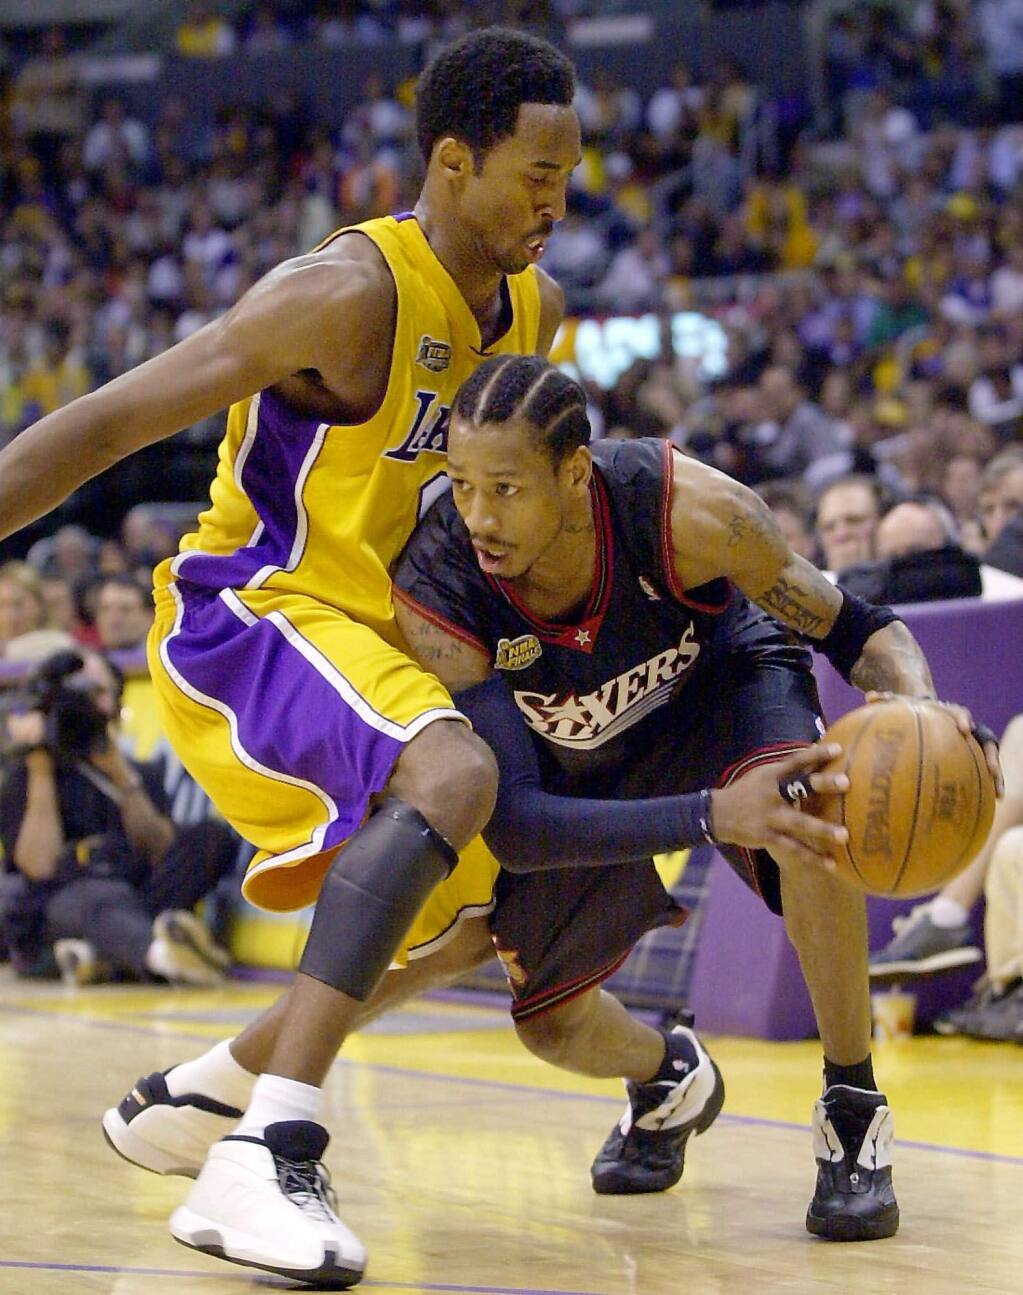 The Philadelphia 76ers' Allen Iverson, right, drives against the Los Angeles Lakers' Kobe Bryant during the first half of Game 2 of the NBA Finals Friday, June 8, 2001, in Los Angeles. (AP Photo/Kevork Djansezian)